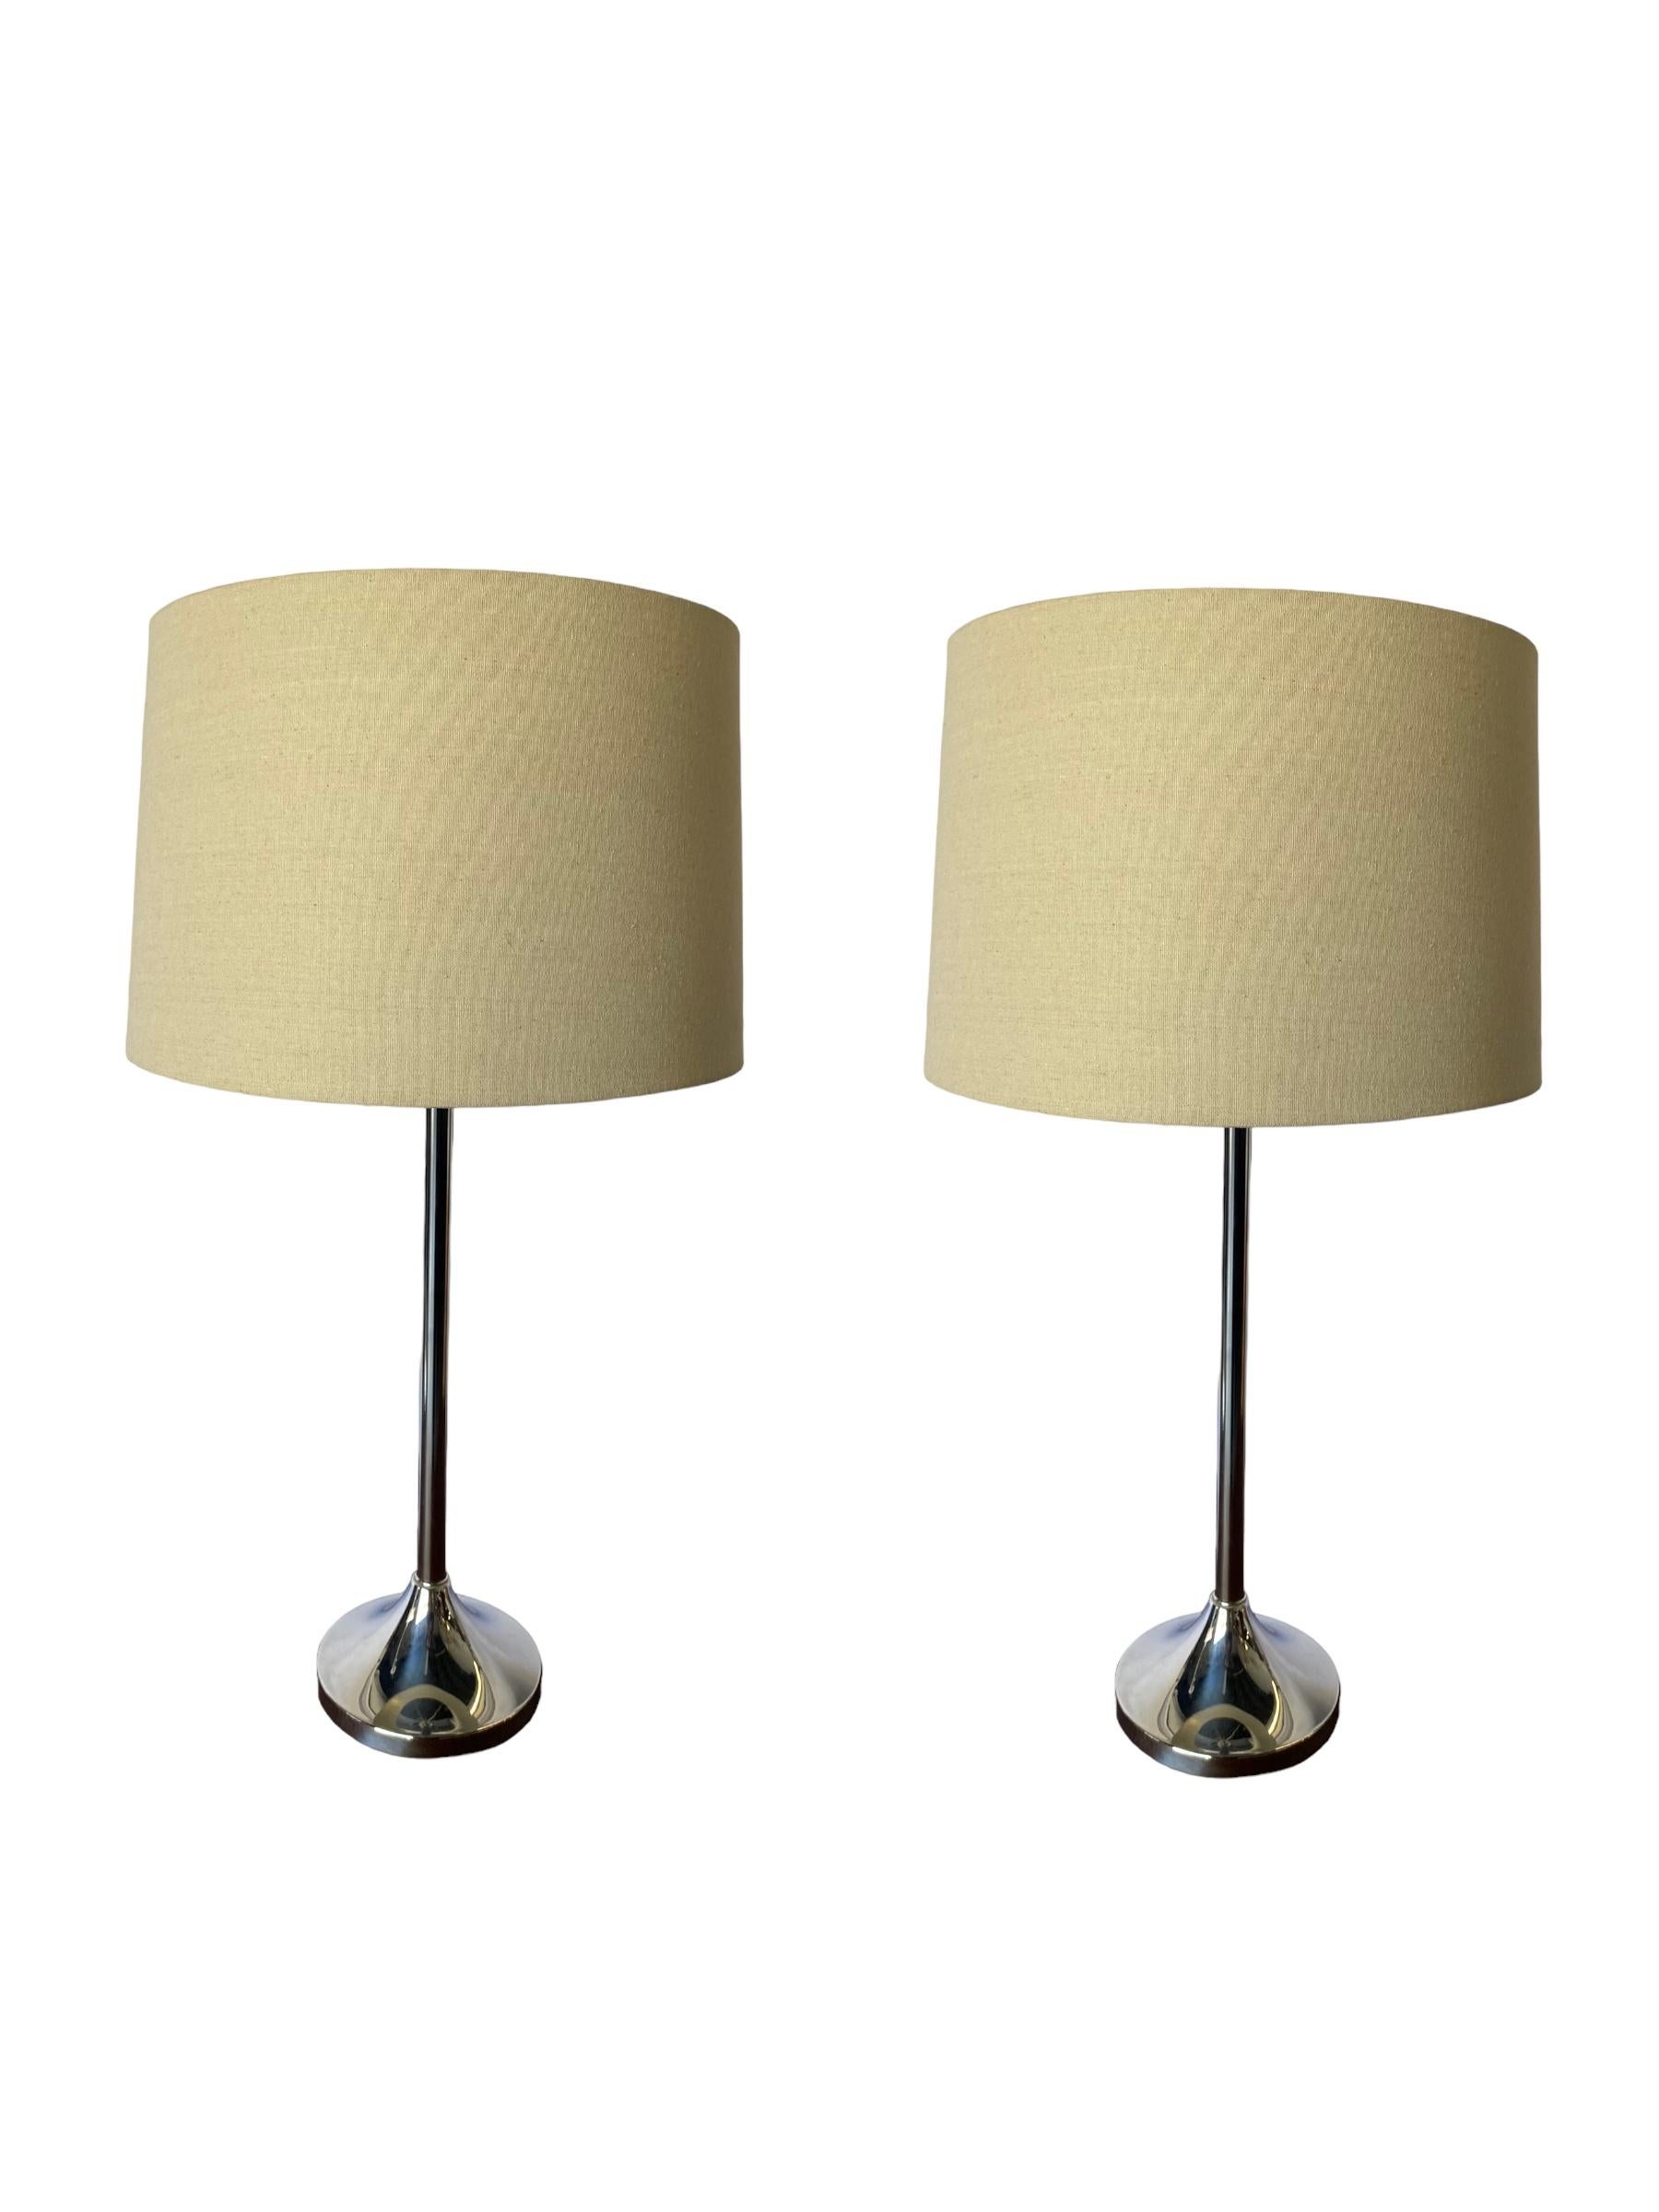 Pair of modern chrome table lamps with tulip style pedestal base. Elegant minimal modern design. Chrome is in good condition with no rust or pitting. Lampshades sold separately. 